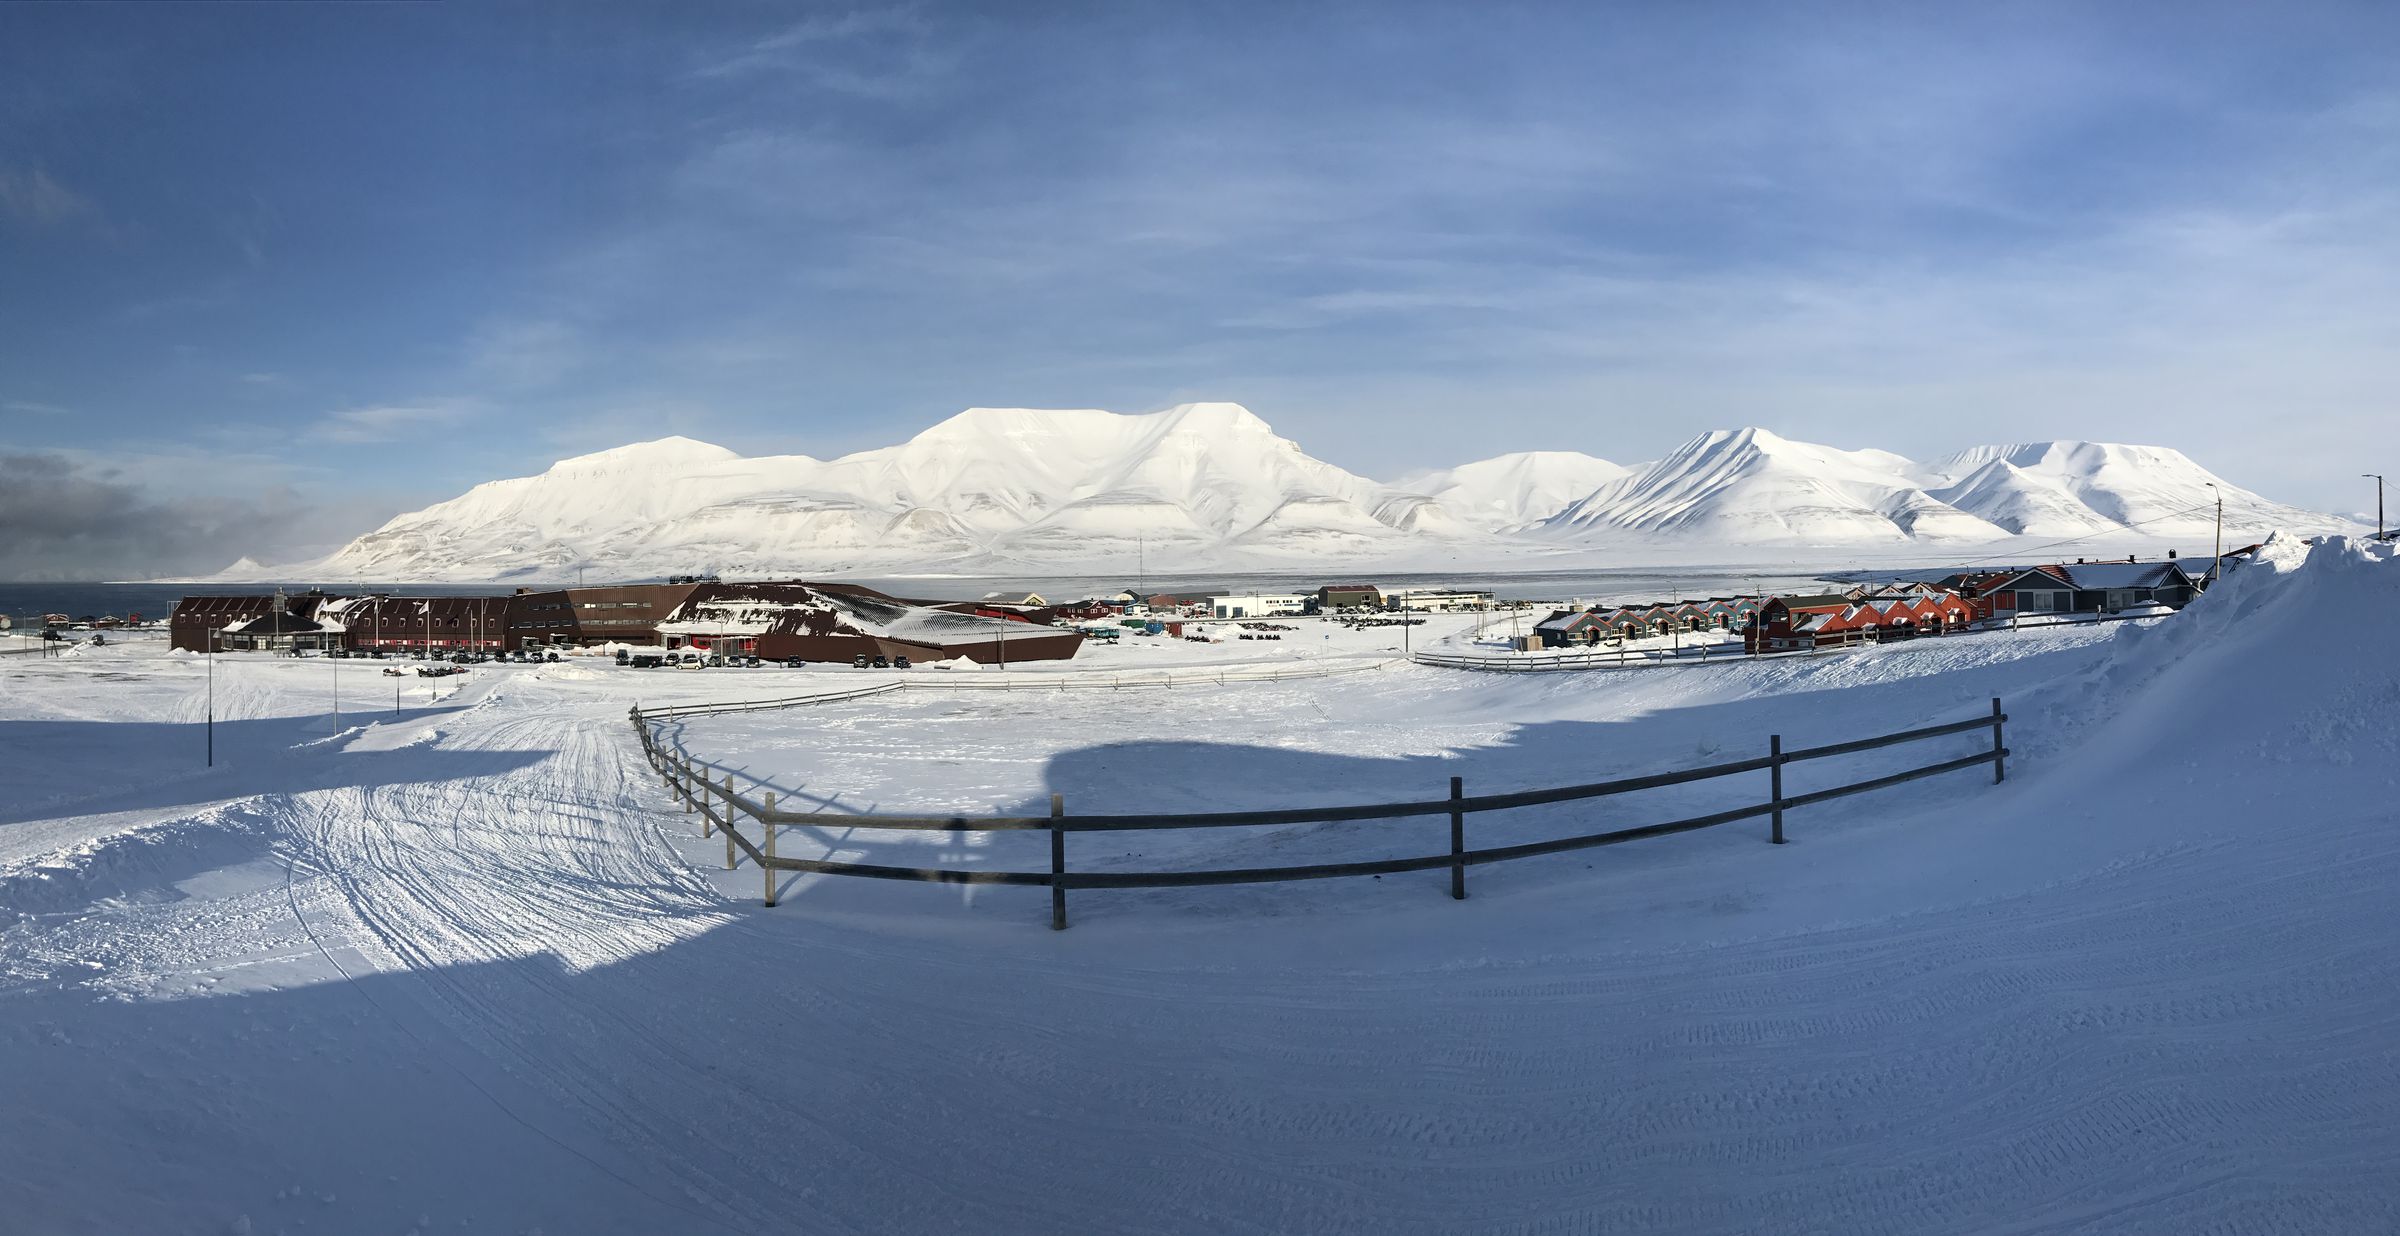 The archipelago of Svalbard is remote but there are daily flights to the Norwegian mainland.